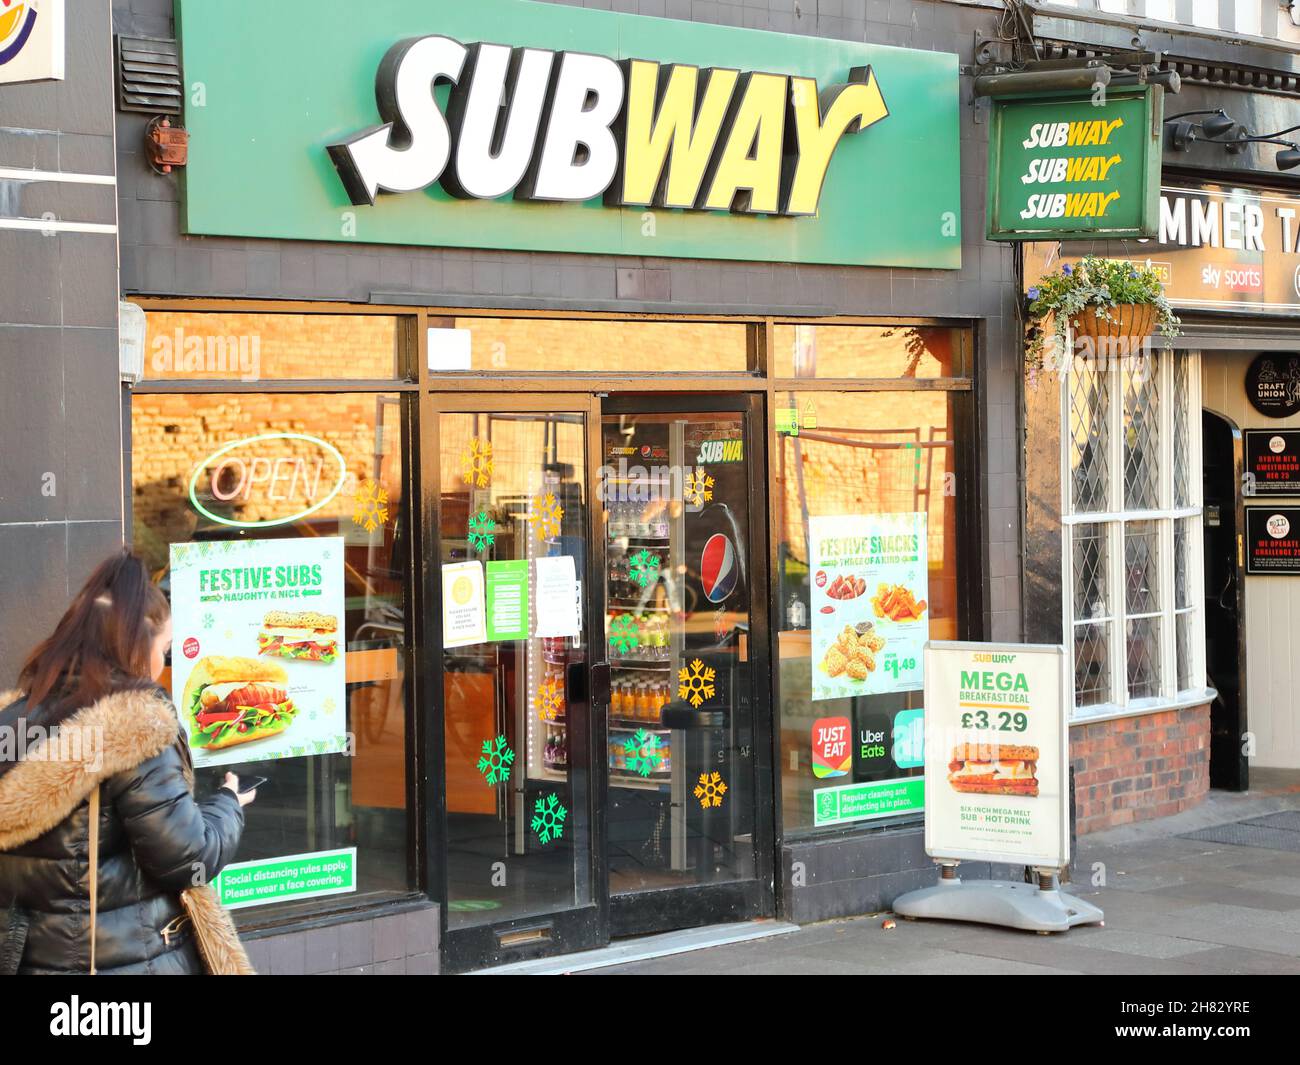 Subway takeaway outlet in Cardiff city, Wales, UK Stock Photo